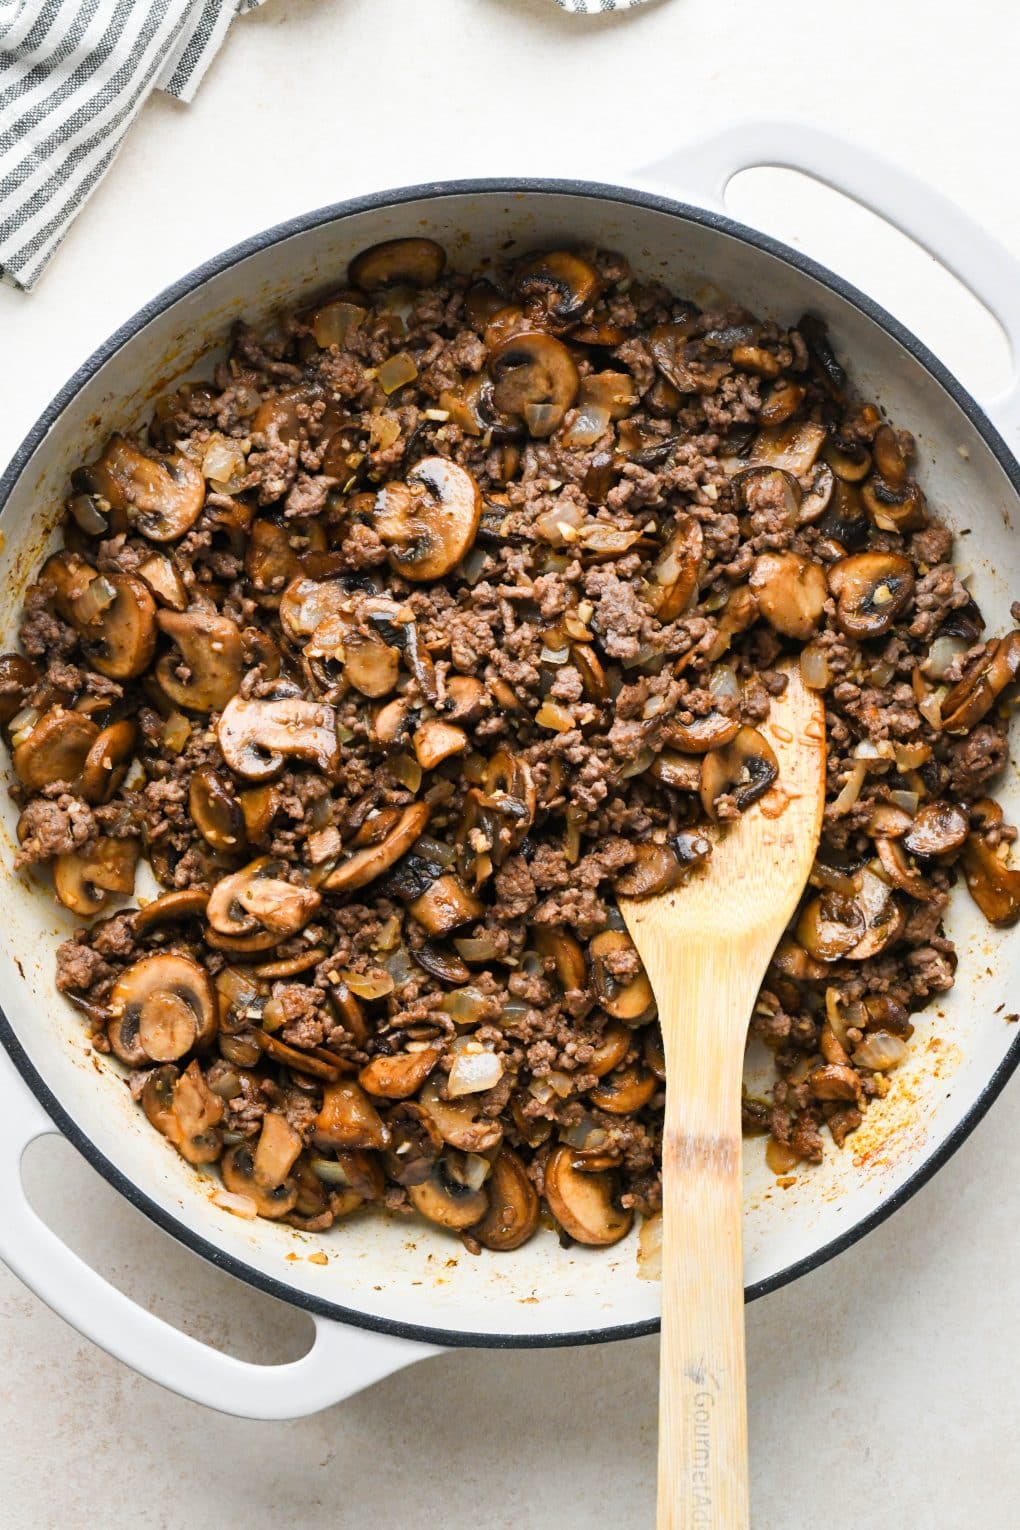 How to make Dairy Free Beef Stroganoff: Mushrooms added back to the skillet with spices, before stirring together.